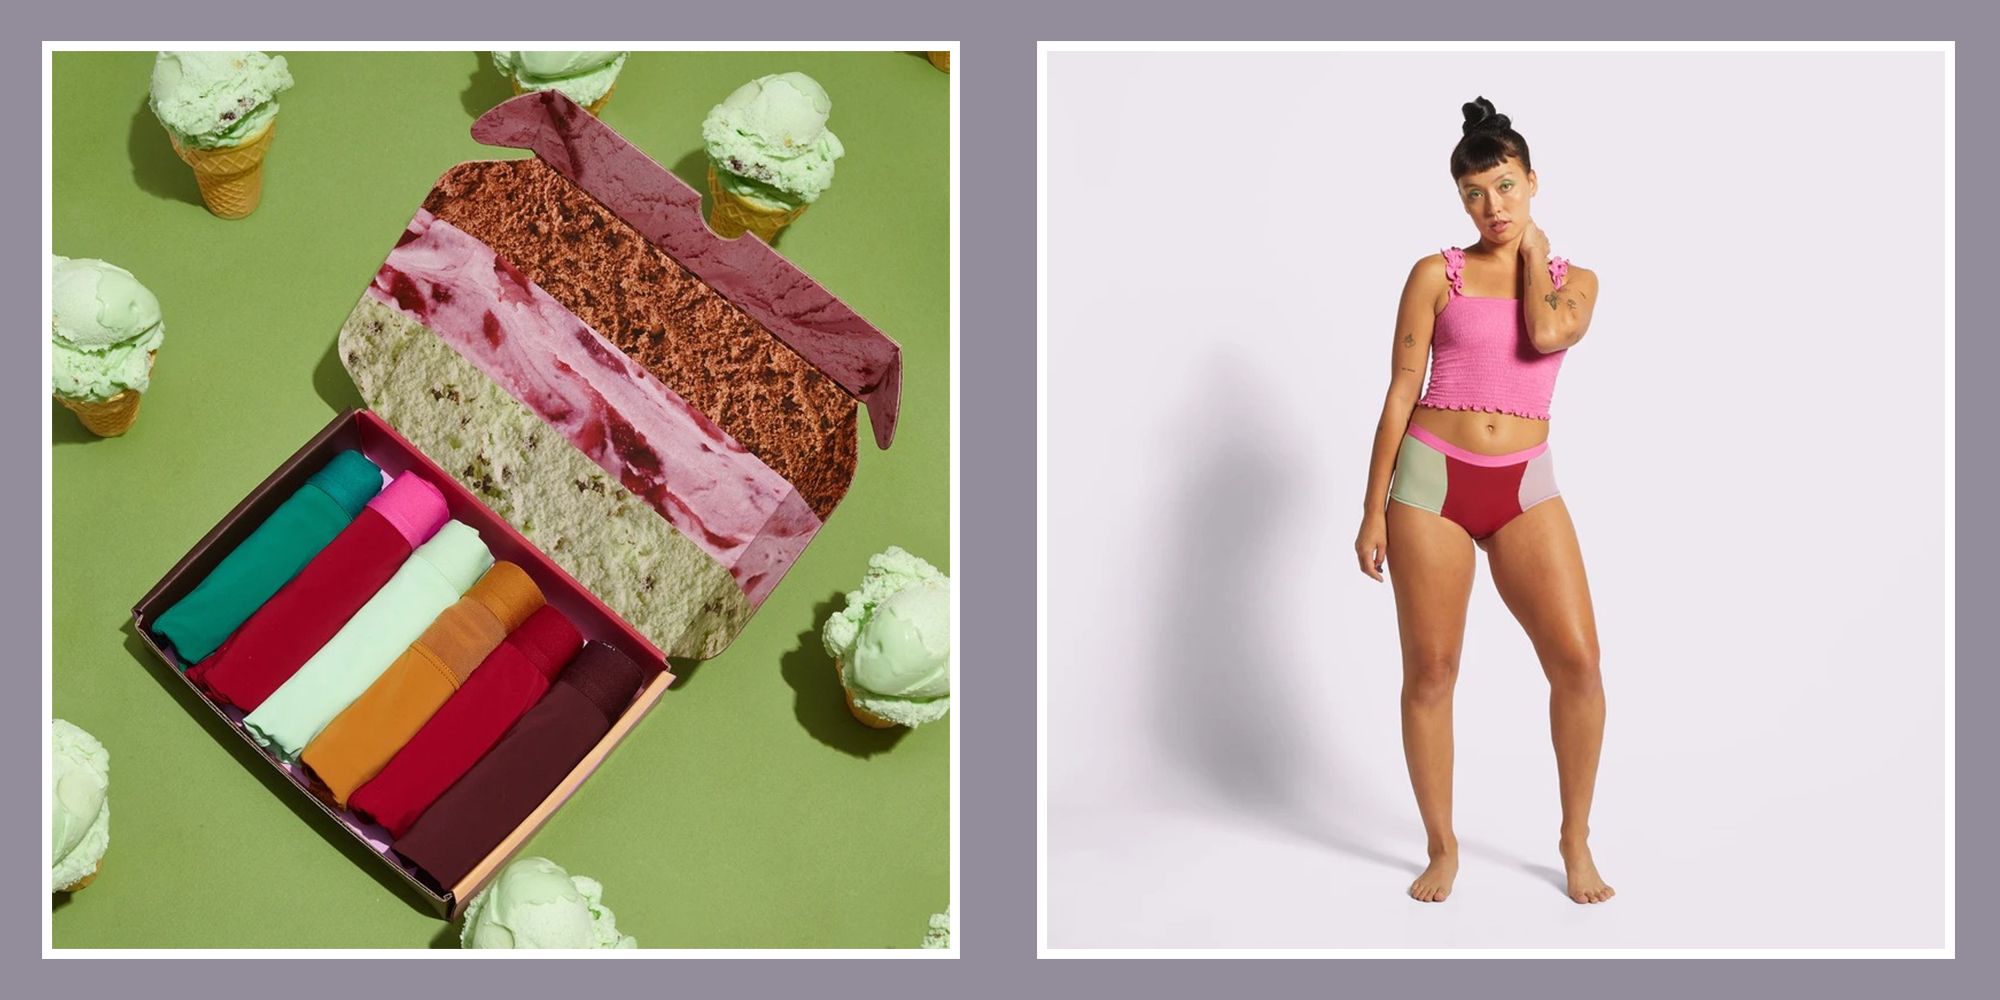 Parade's New Ice Cream Collection Is Super Sweet and Sexy